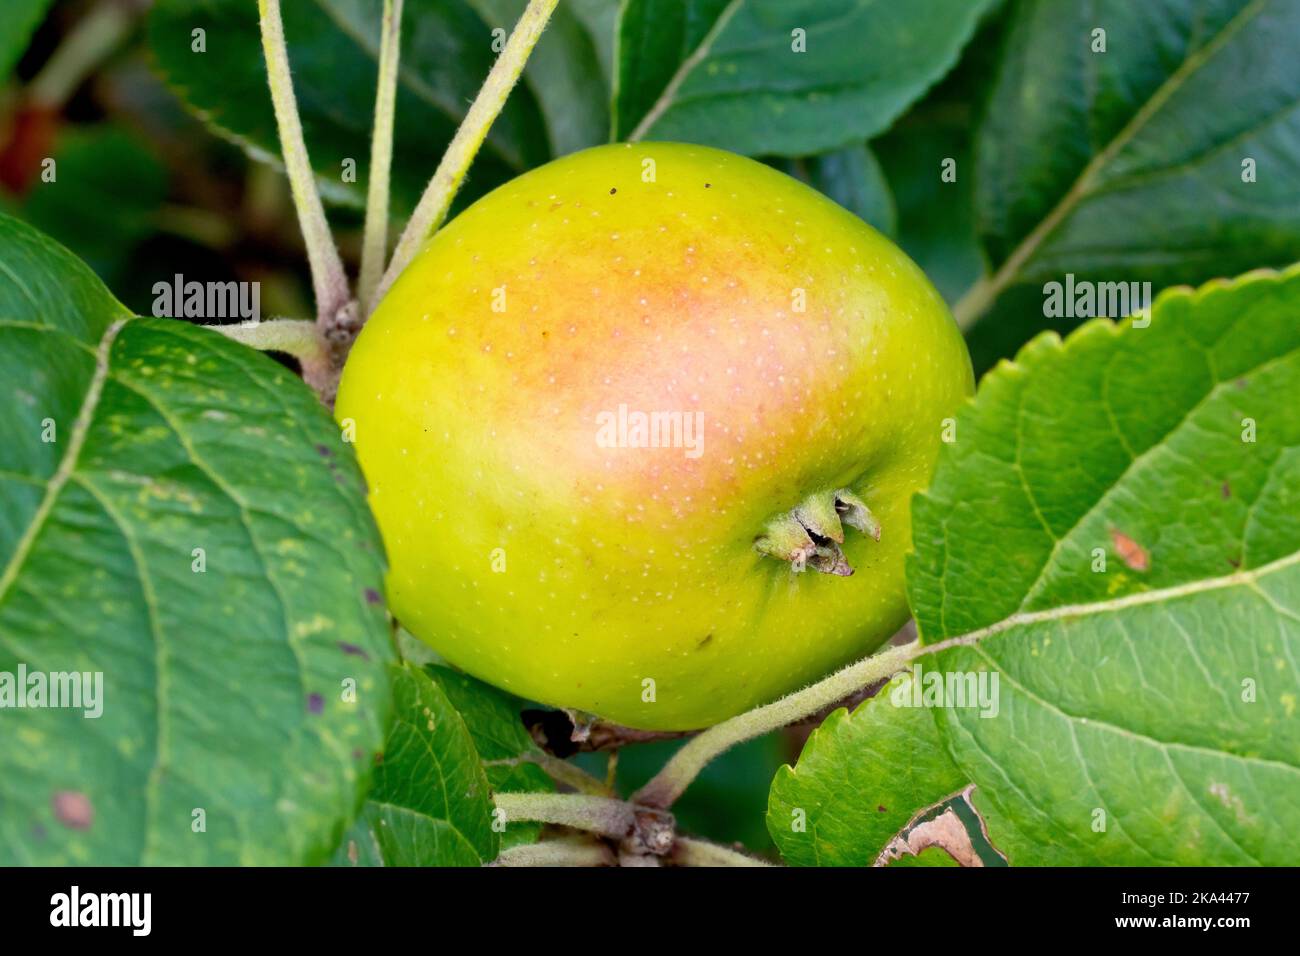 Crab Apple (malus sylvestris), close up of a single fruit or apple ripening amongst the leaves of a tree. Stock Photo